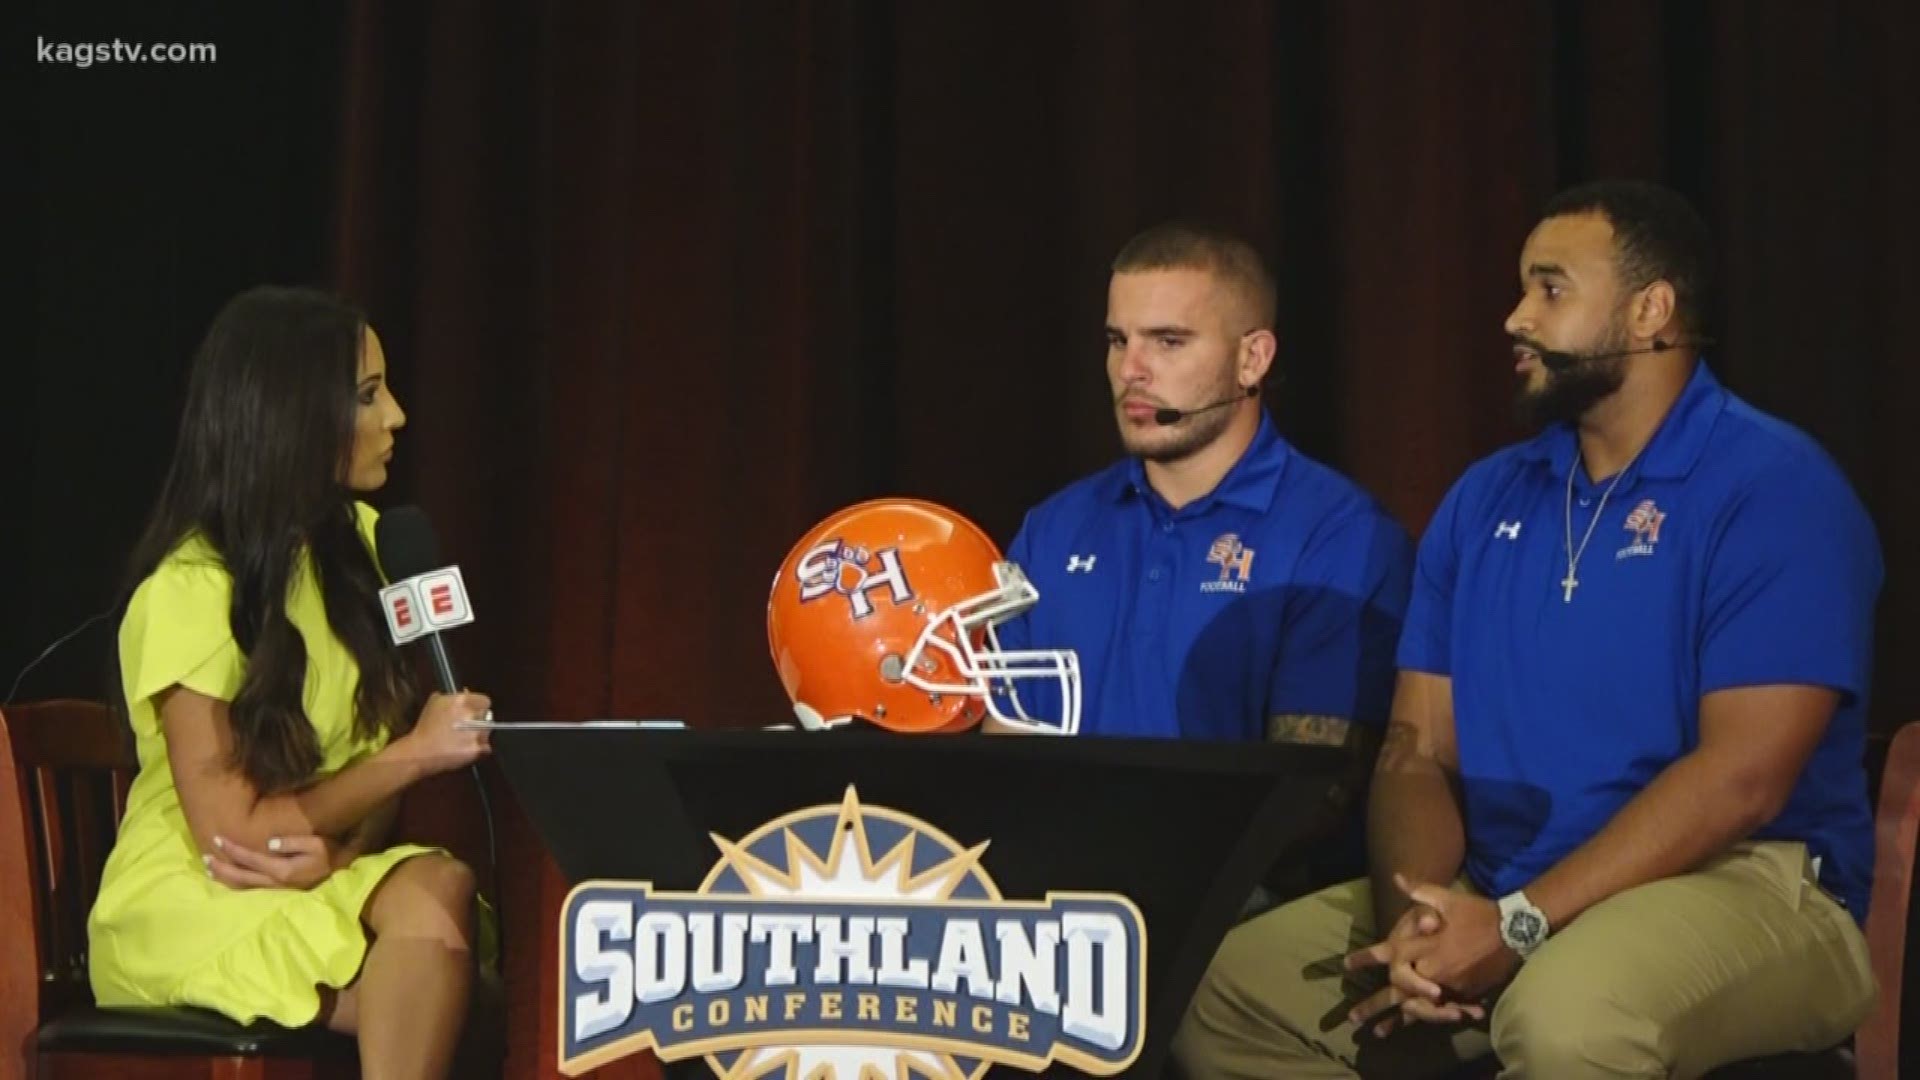 Sam Houston State has been picked to finish fourth in the Southland Conference preseason poll. In addition to missing the FCS playoffs a year ago, the Bearkats have plenty of motivation entering 2019.